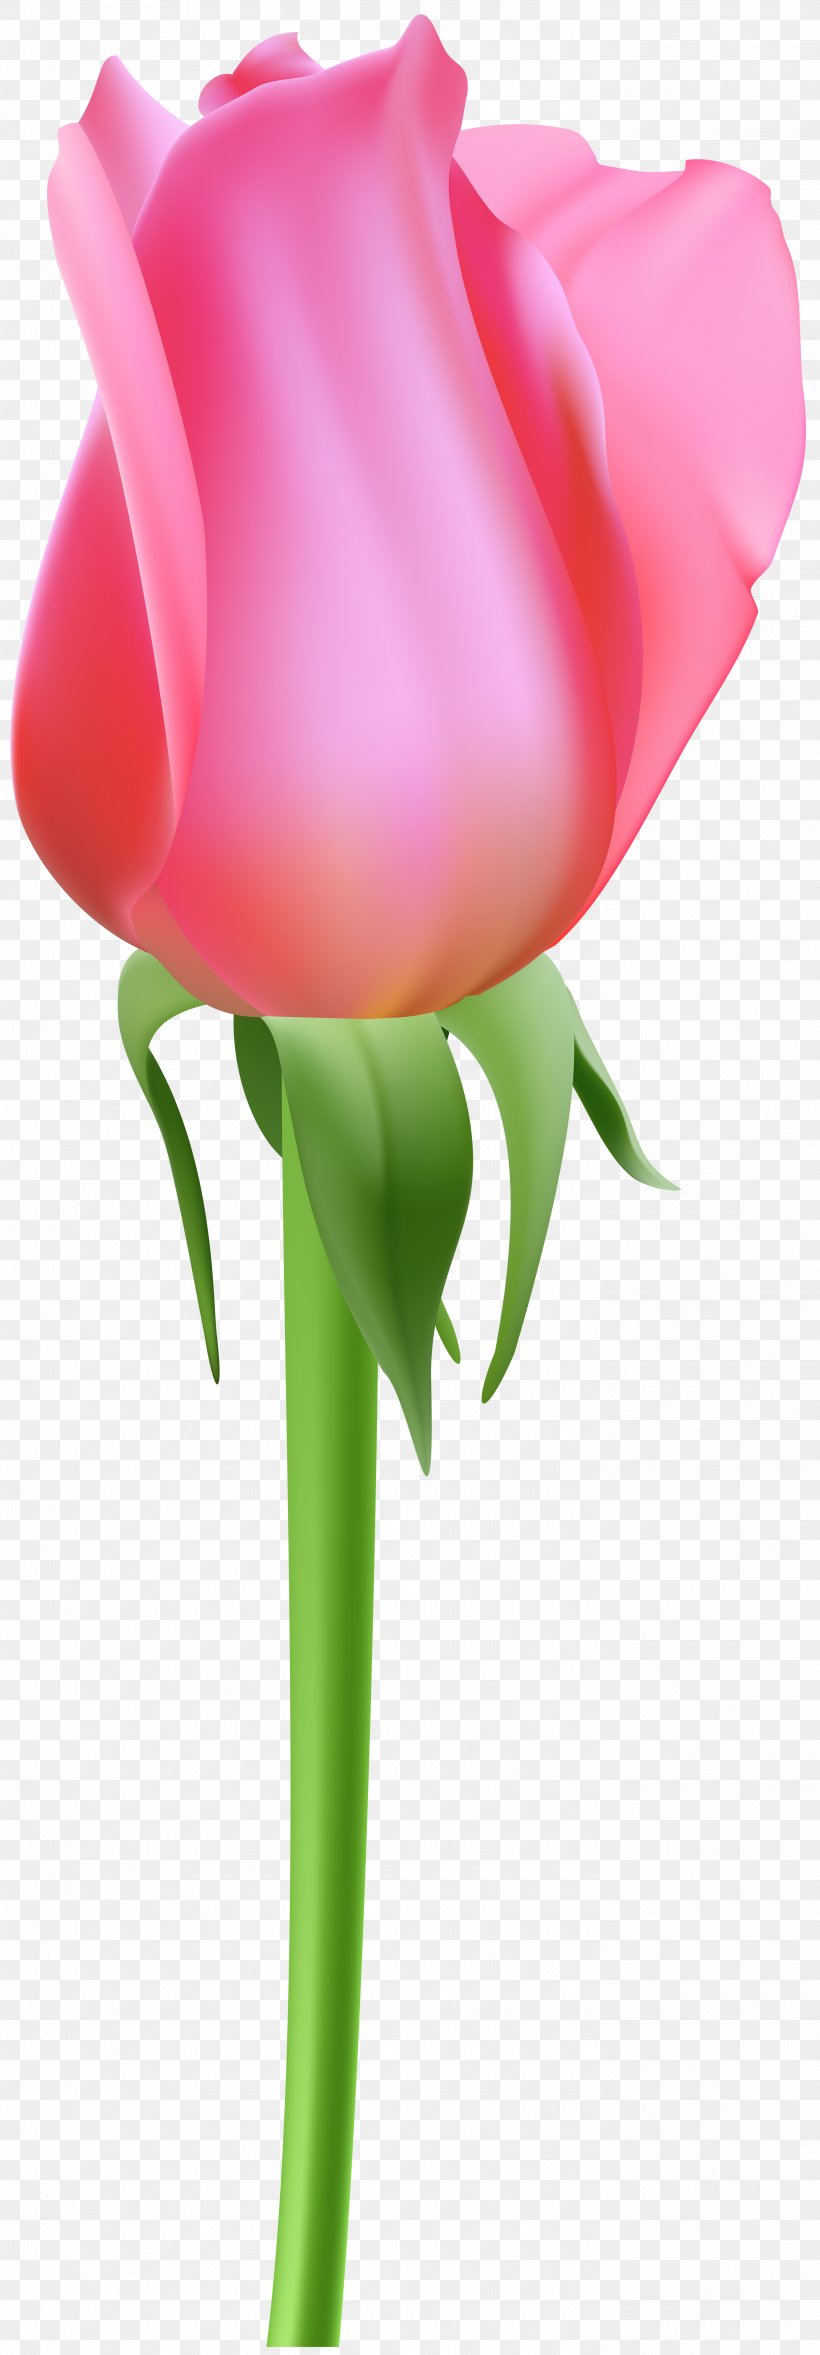 Garden Roses Clip Art Image Graphics, PNG, 2785x8000px, Garden Roses, Bud, Cartoon, Cut Flowers, Flower Download Free